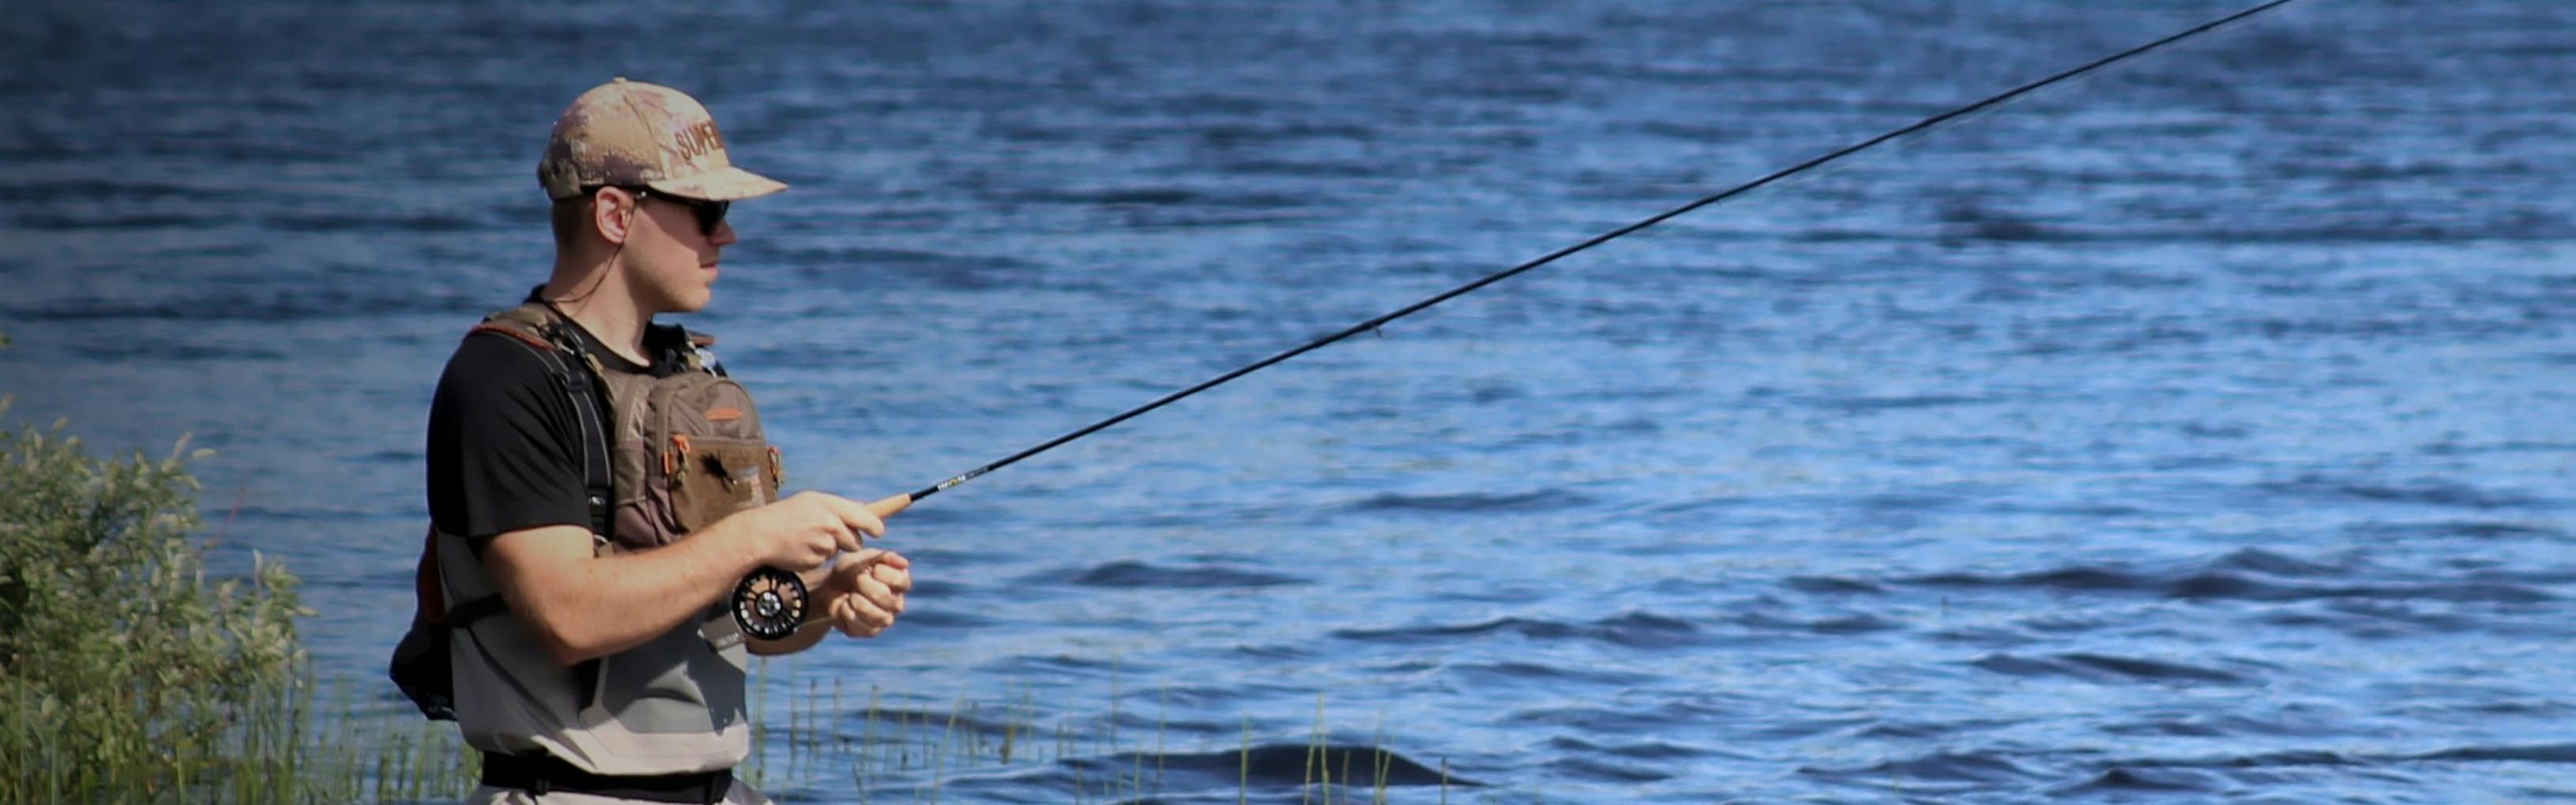 A man standing in a body of water casting a fly rod.